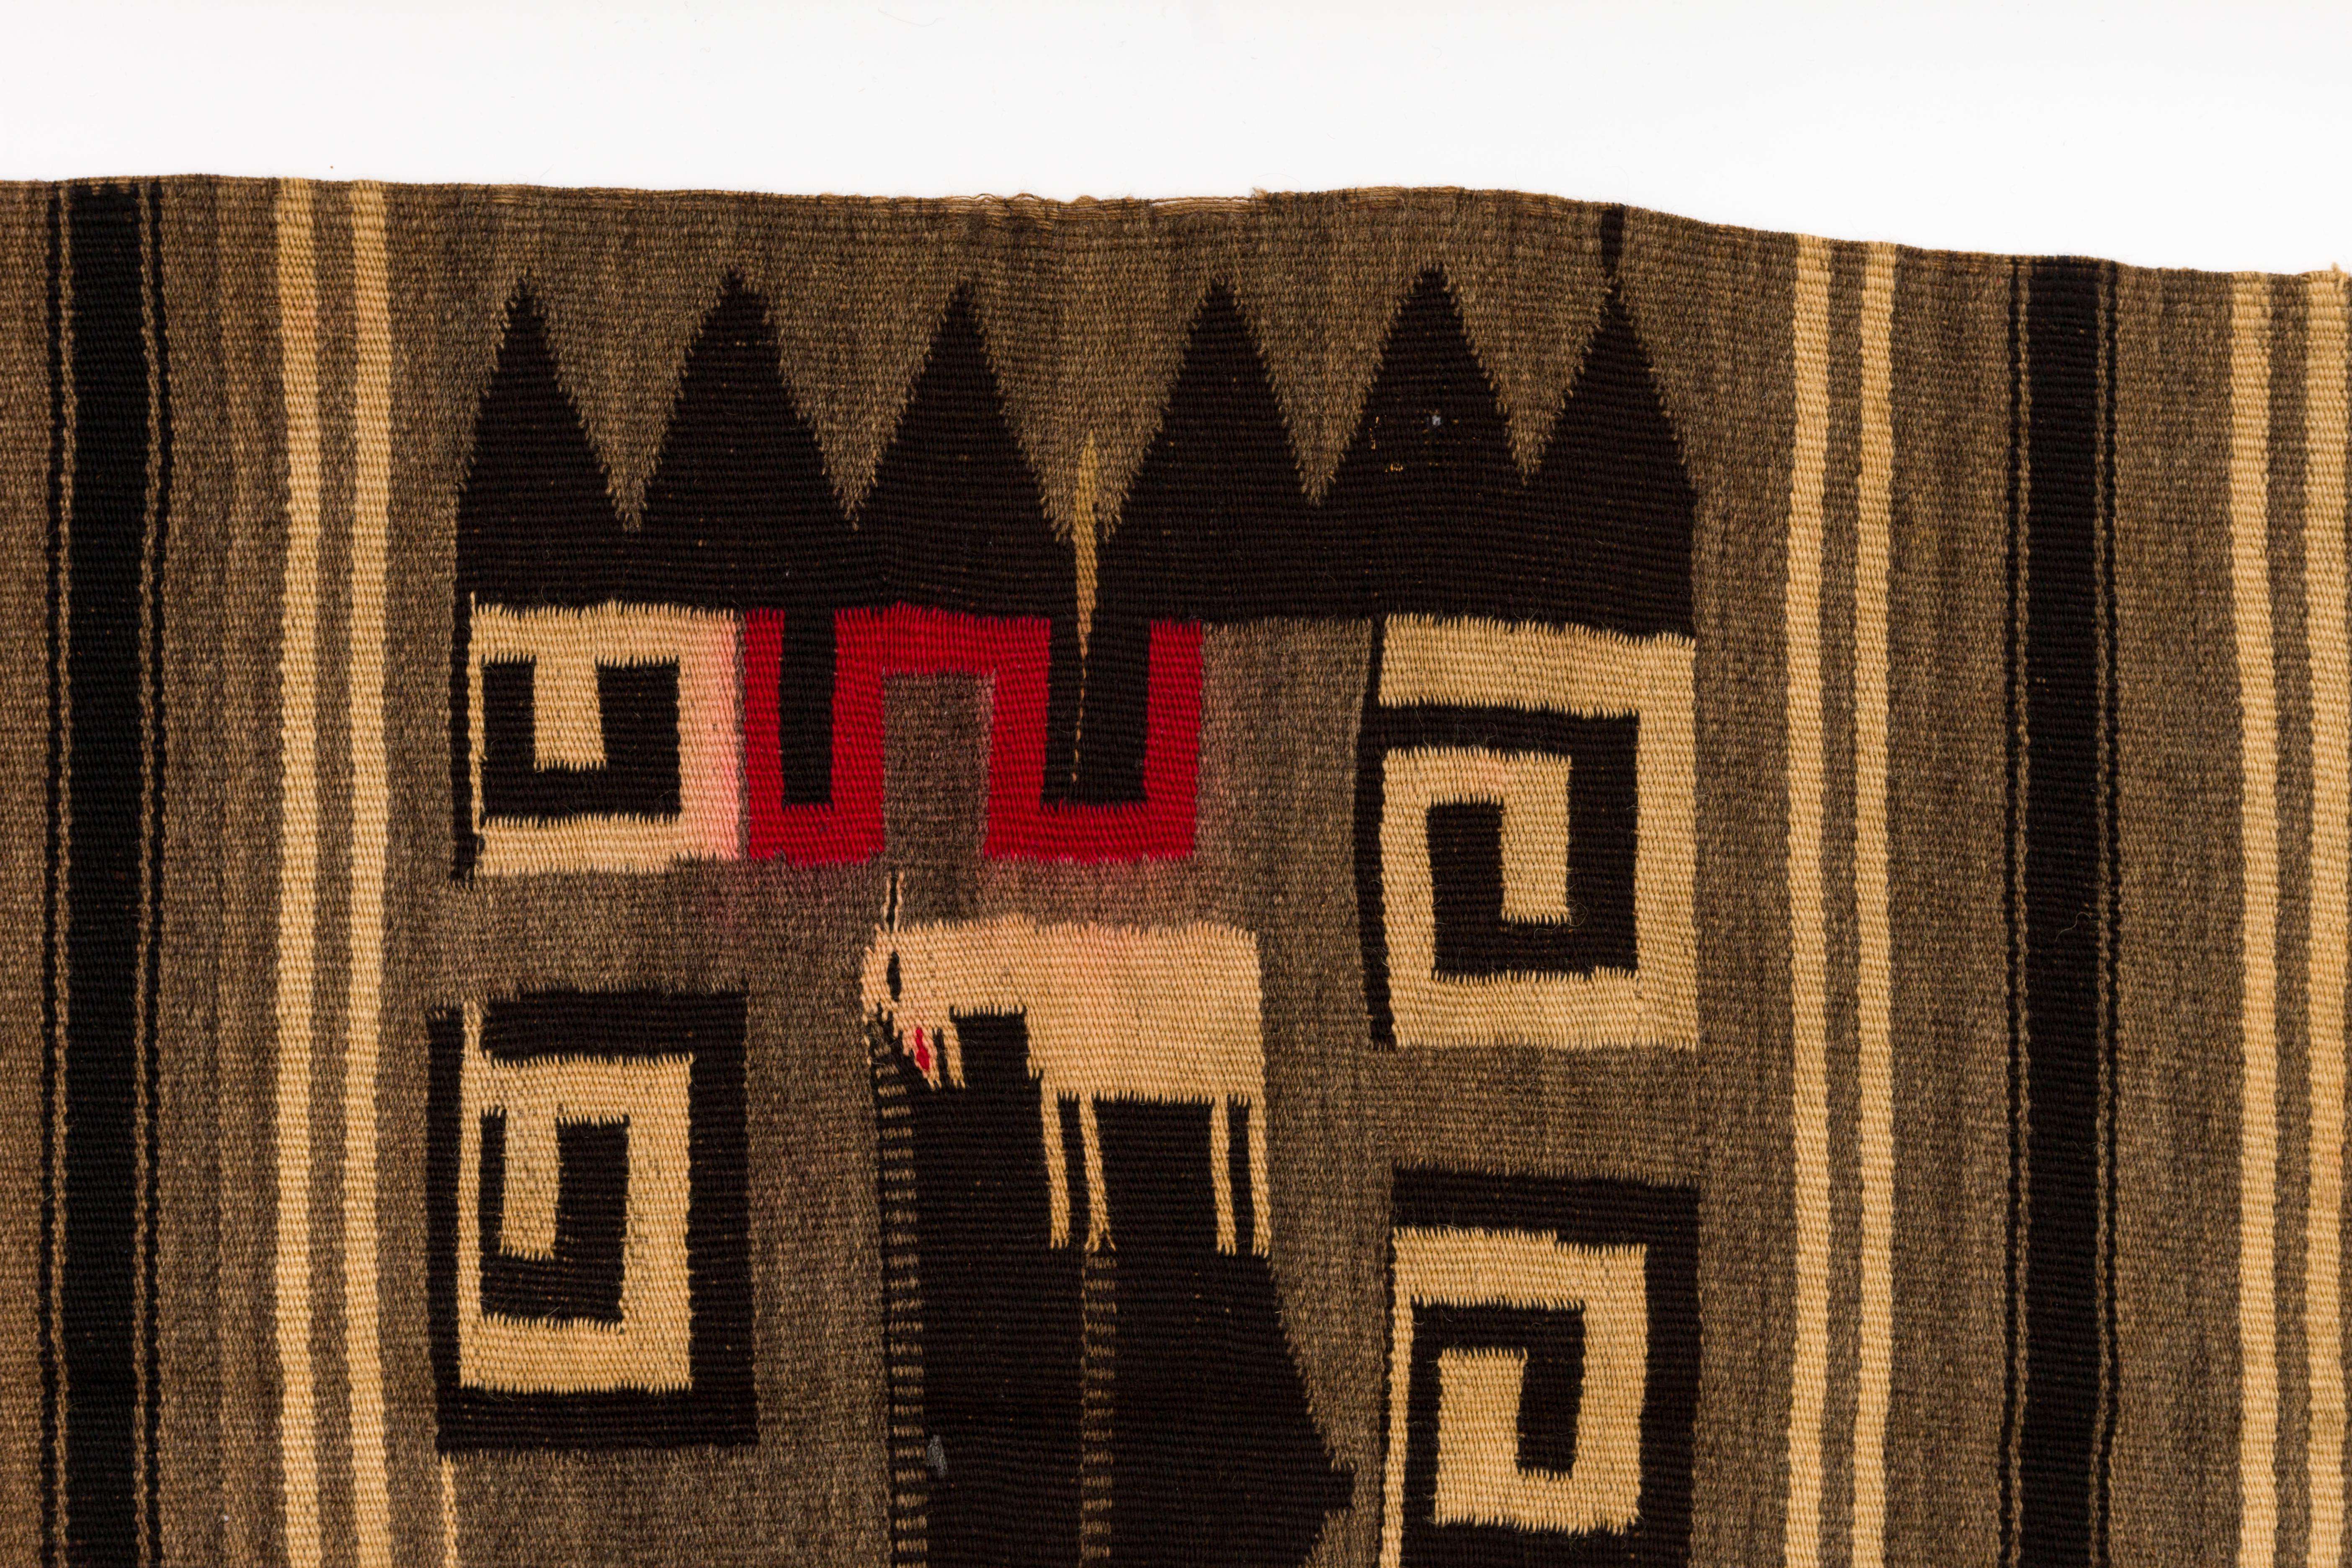 Antique Mixtec wool serape blanket with burro motif, and cochineal dye design. 
handwoven by Mixtec native woman in the highlands of Oaxaca, Mexico, circa early 20th century. Some fringe loss, and holes, pictured.